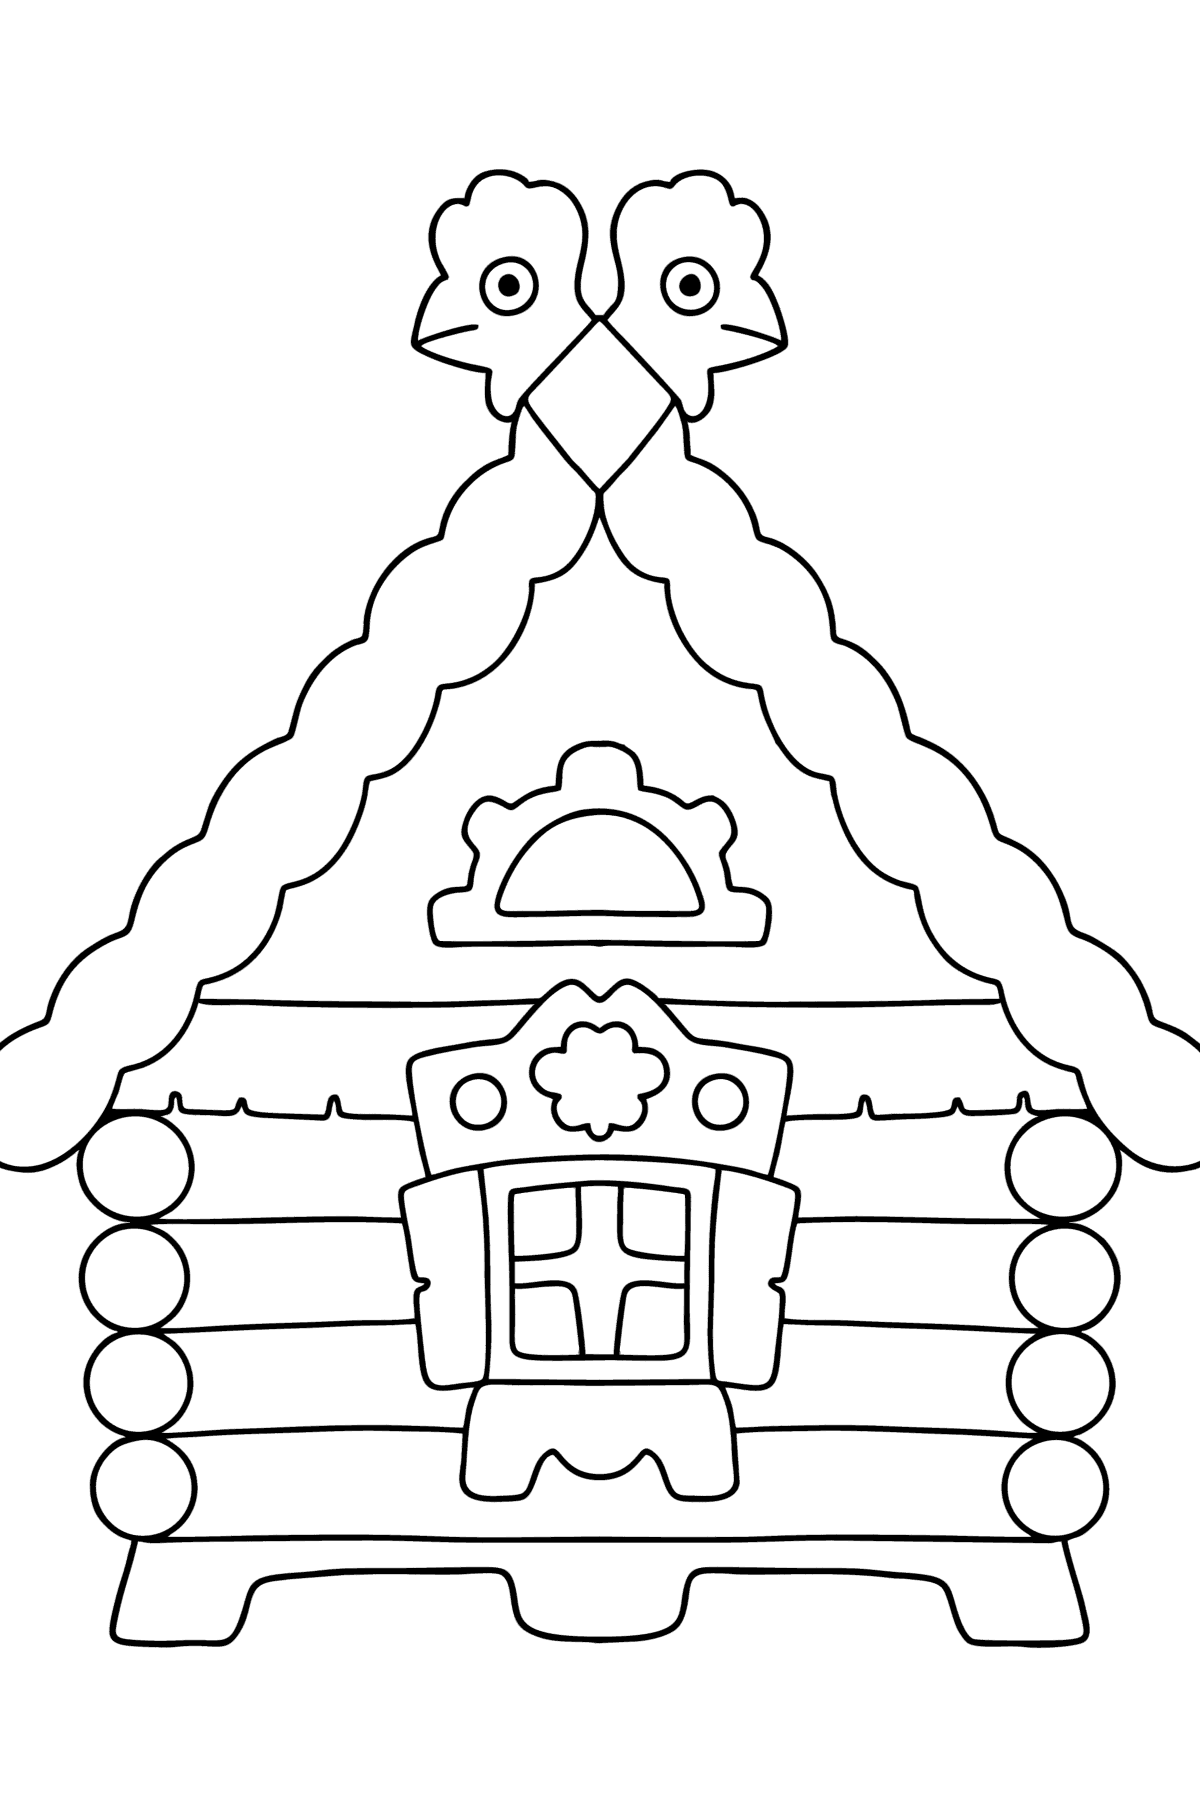 Log Cabin coloring page - Coloring Pages for Kids